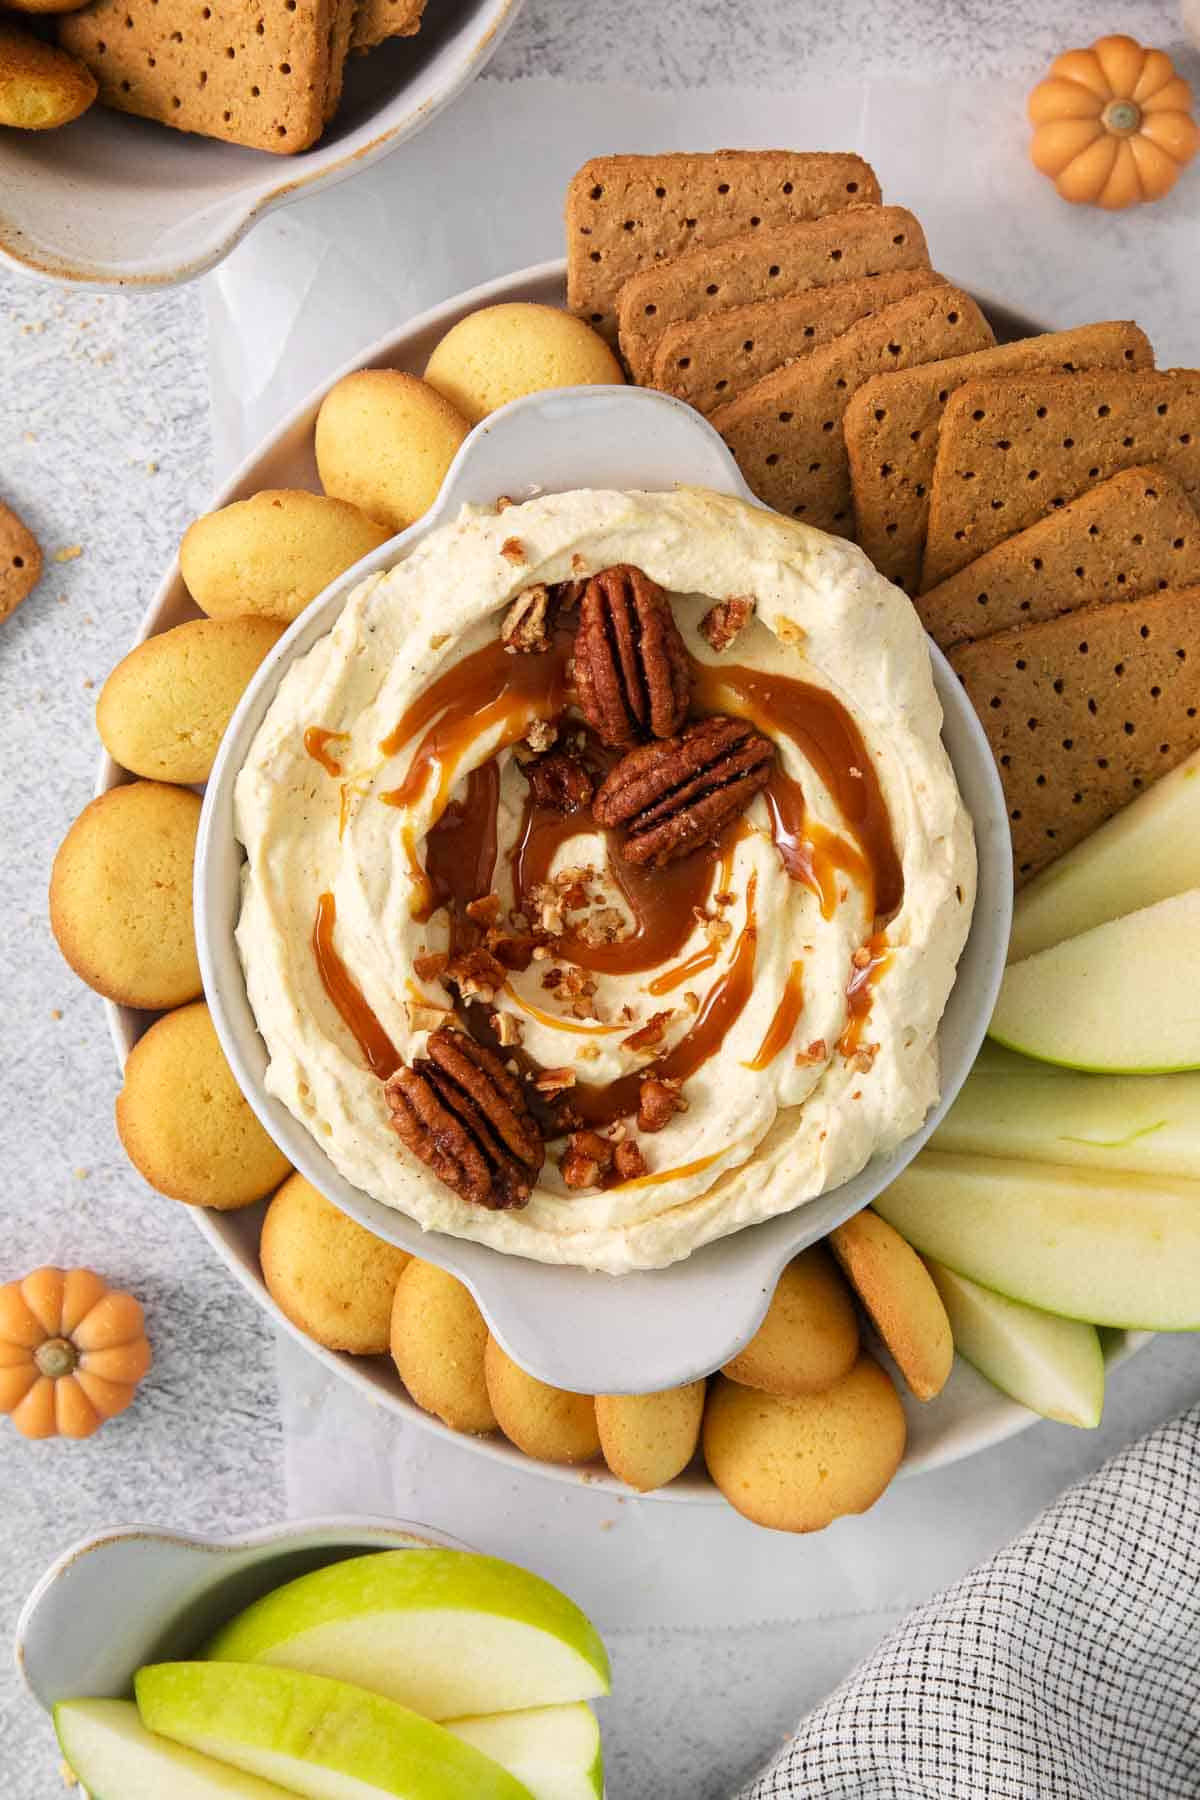 Pumpkin cheesecake dip served on a platter with cookies, graham crackers, and apple slices